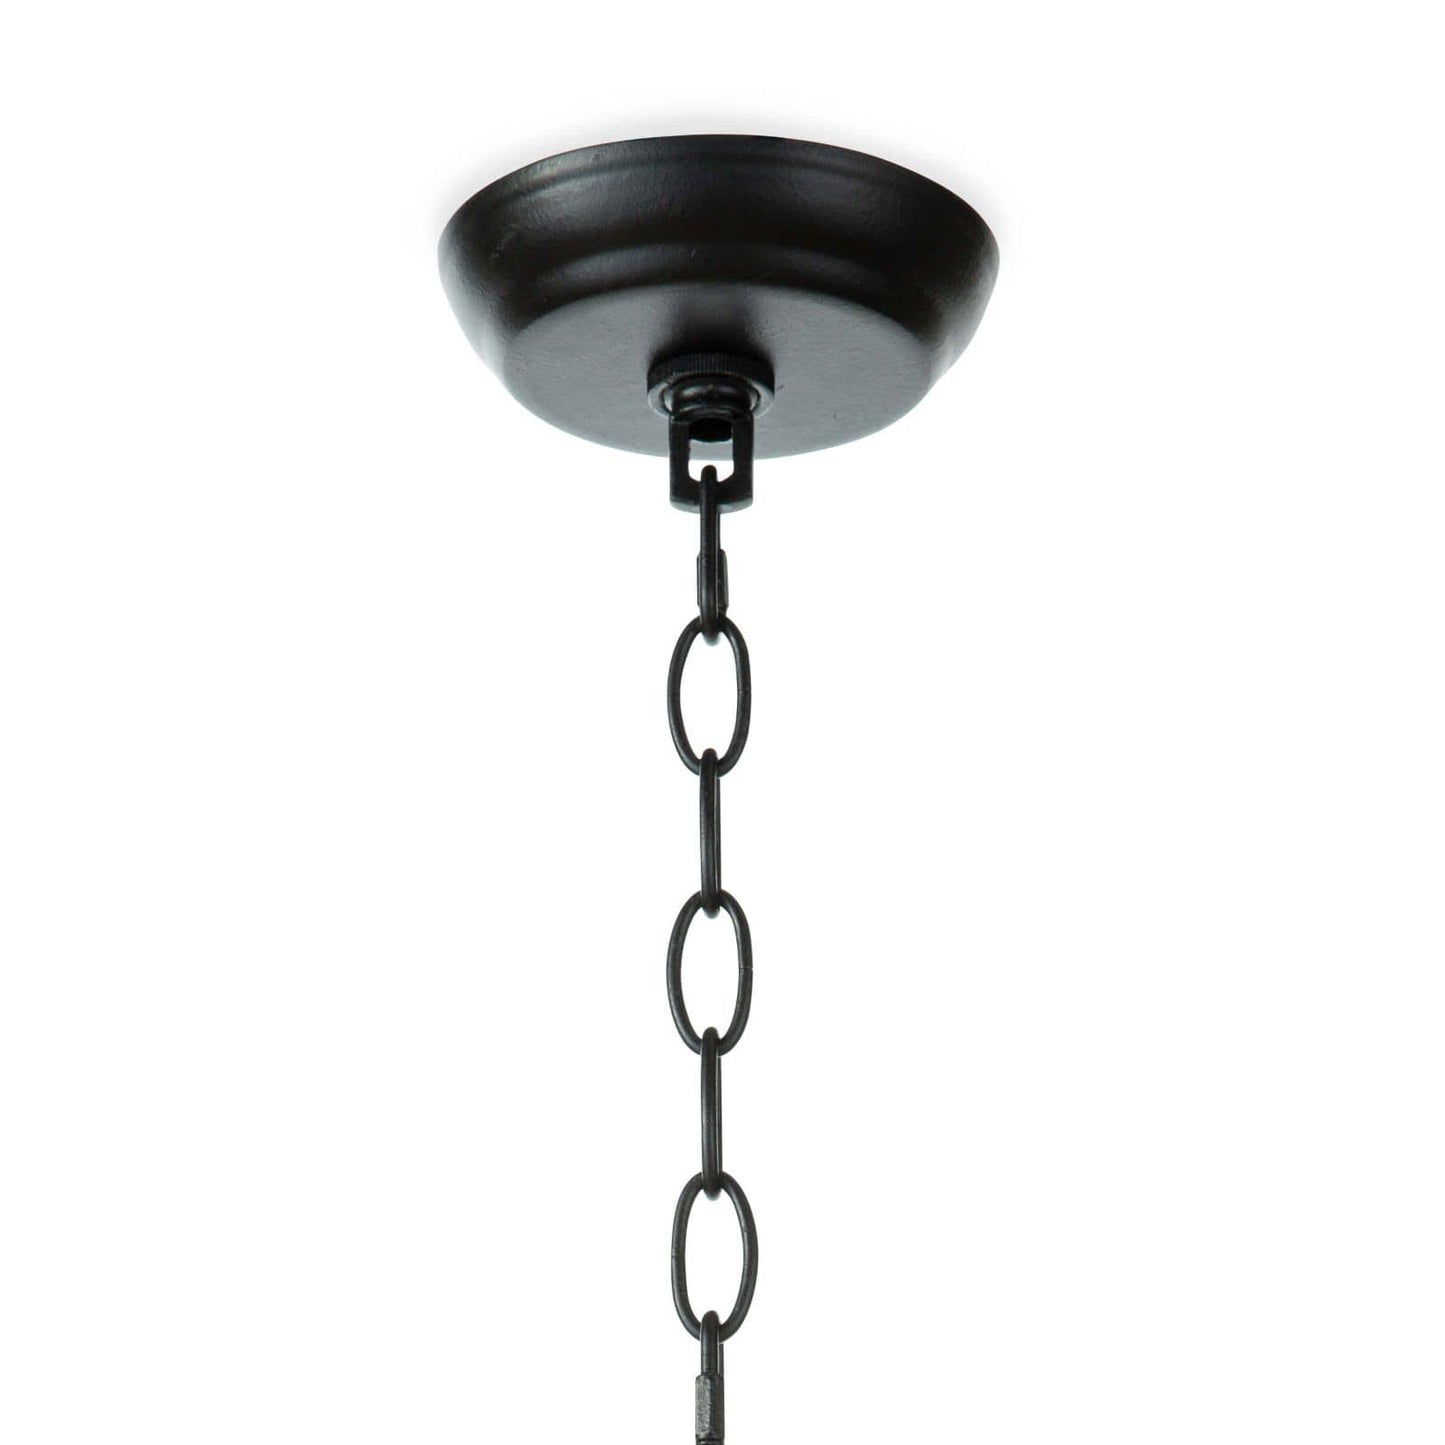 Billie Concrete Pendant Small by Southern Living